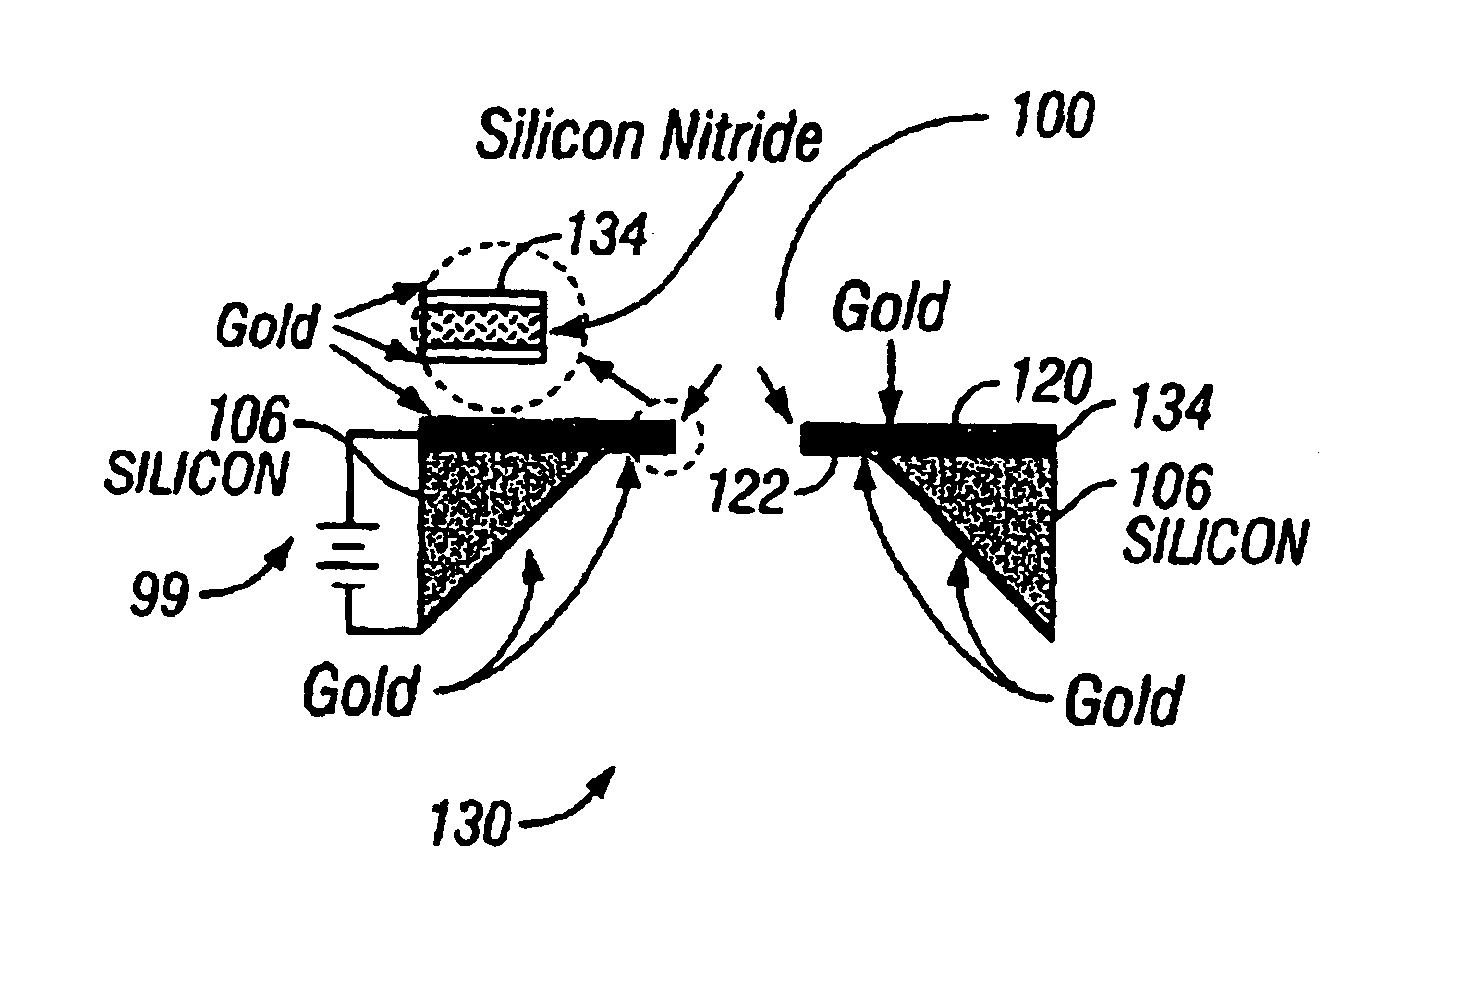 Devices incorporating soft ionization membrane